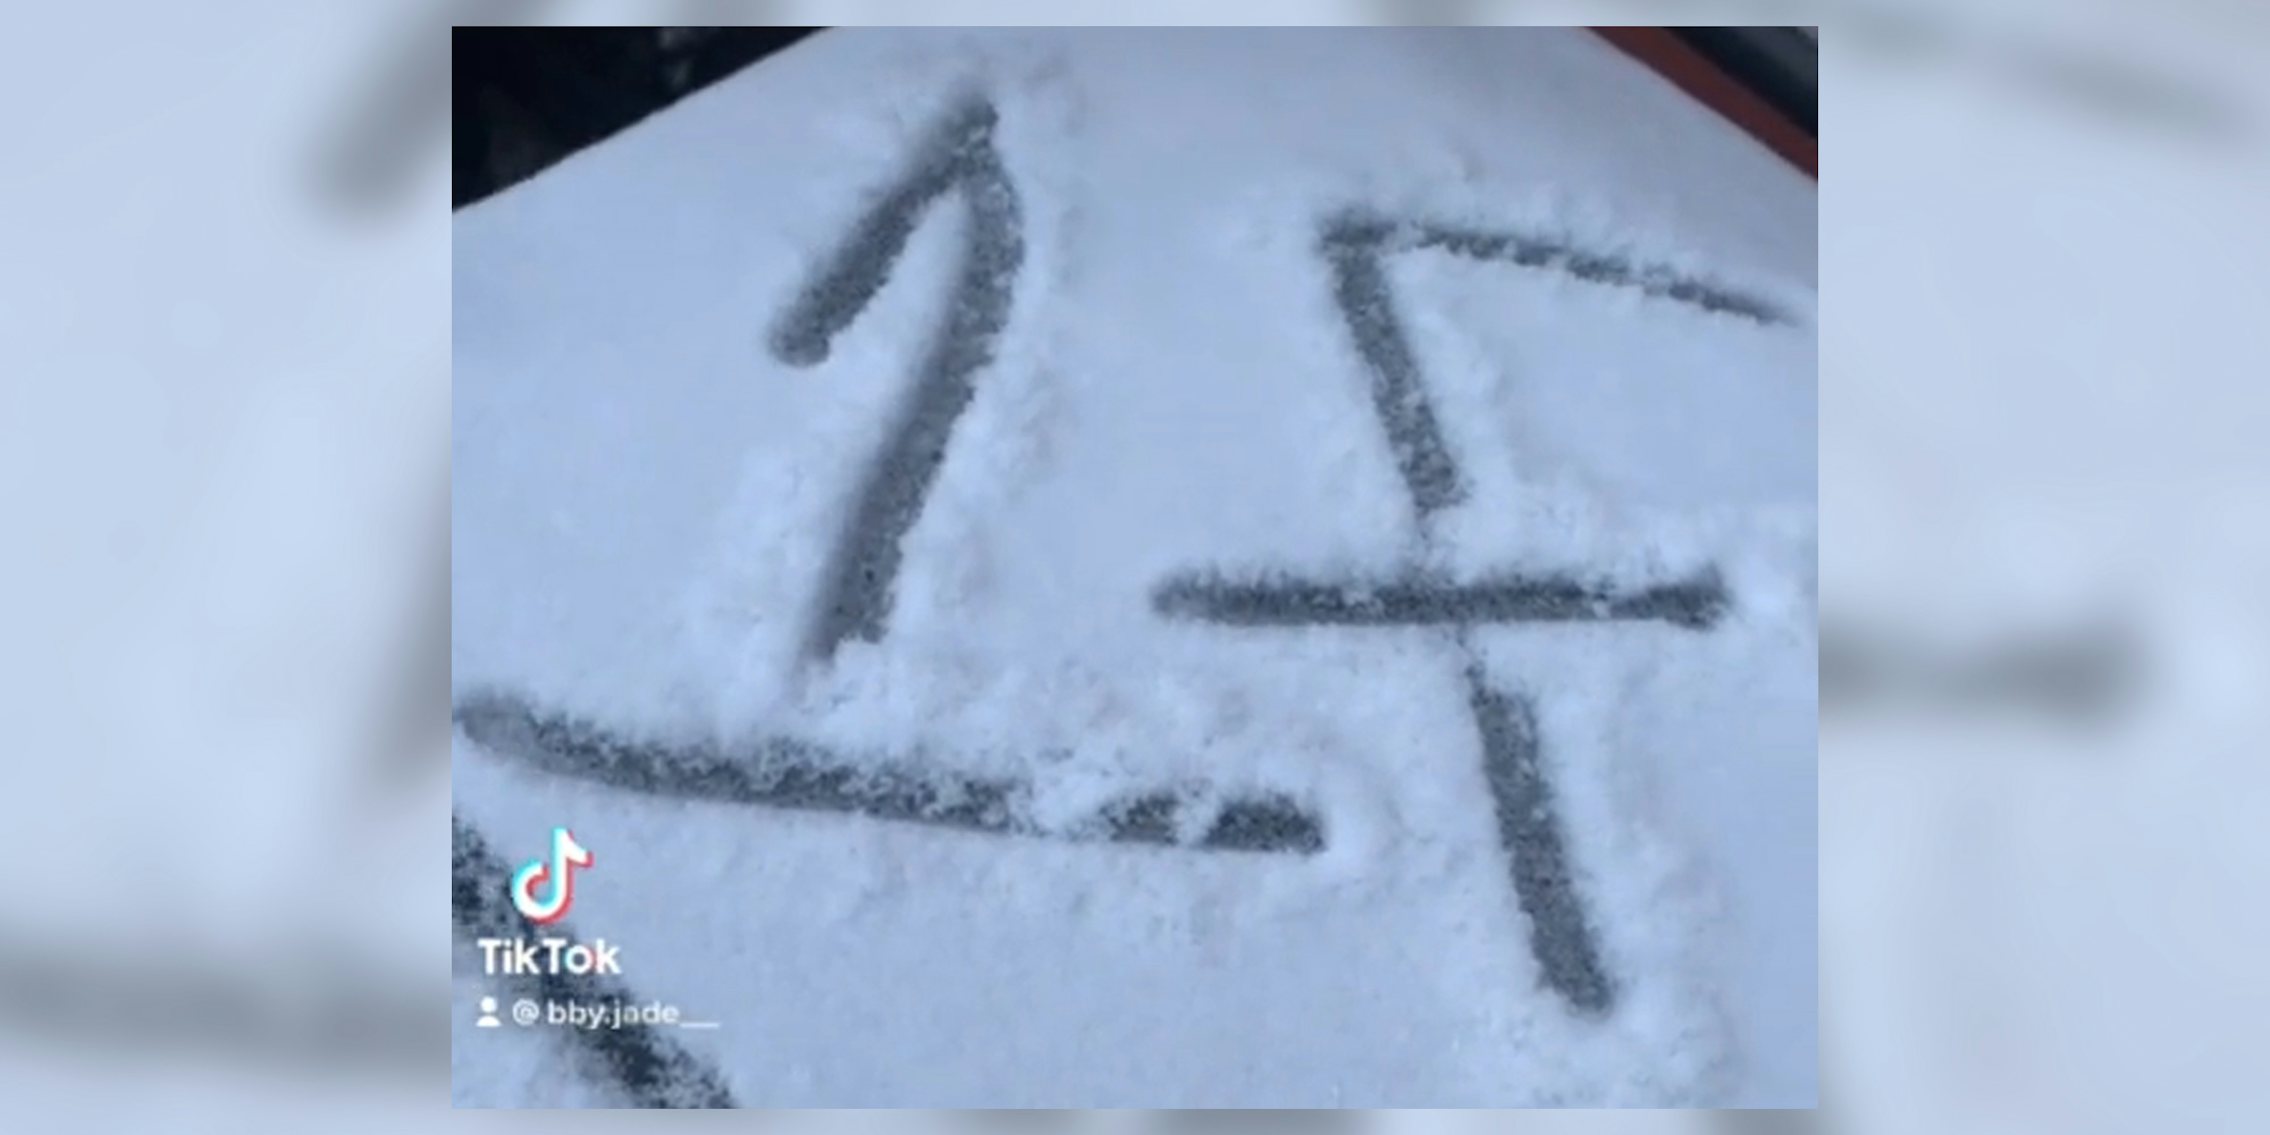 '1F' written in snow on top of a garbage can